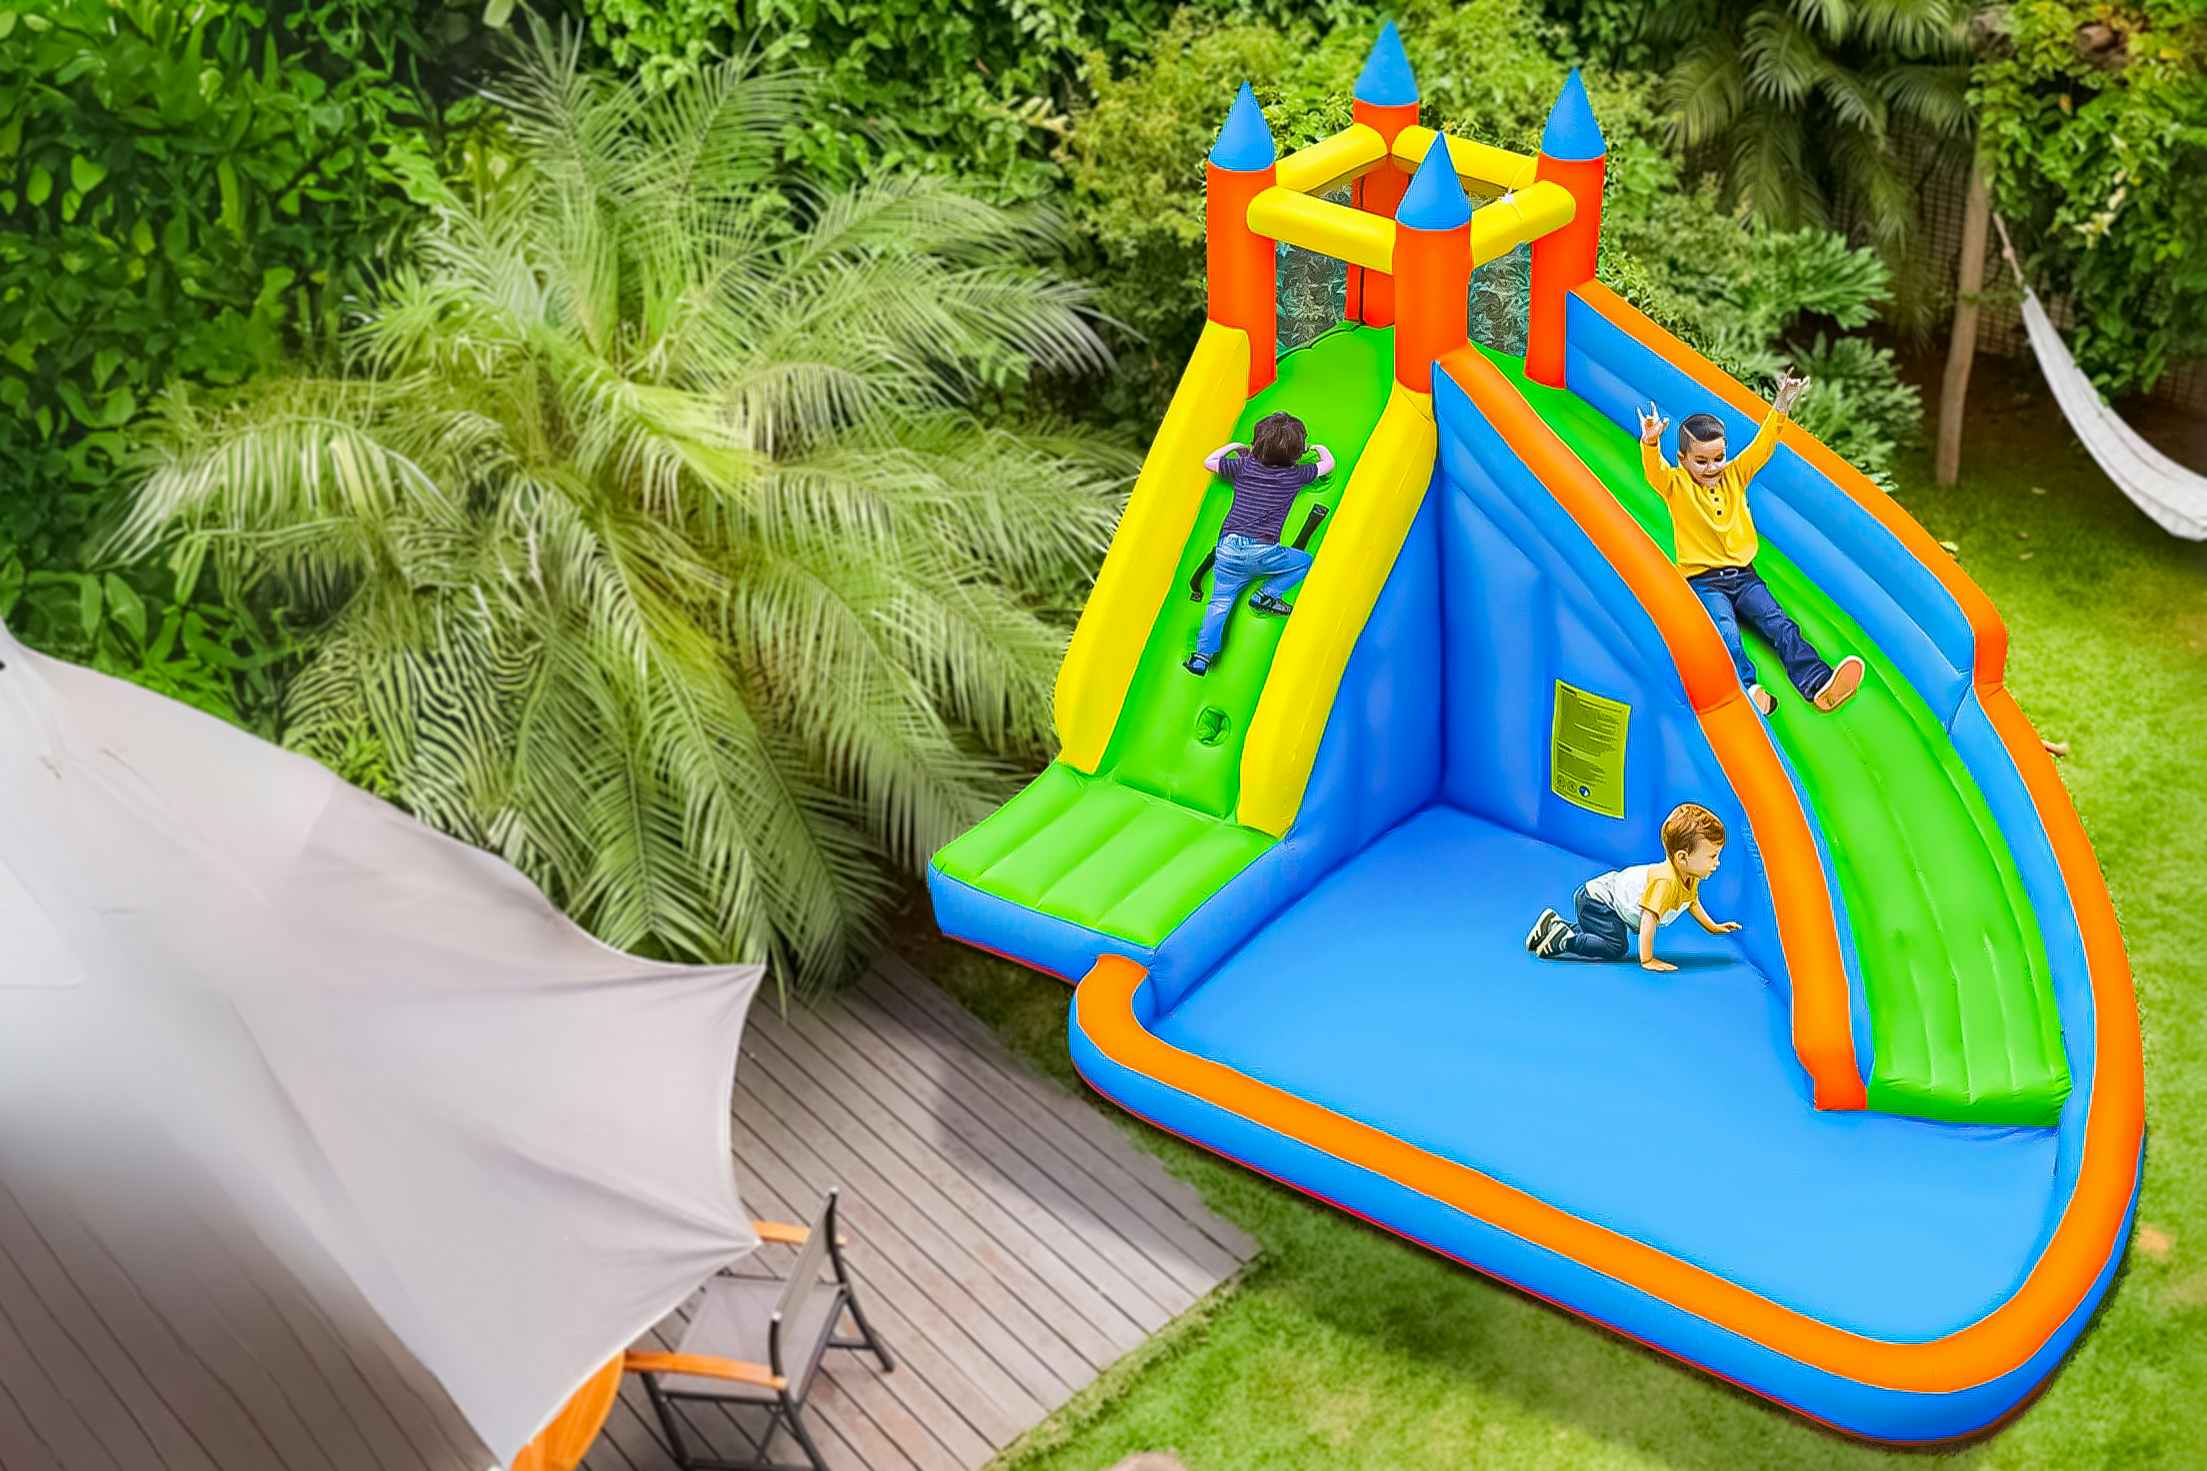 Inflatable Water Slide Bounce House, Now Just $190 at Walmart (Reg. $389)